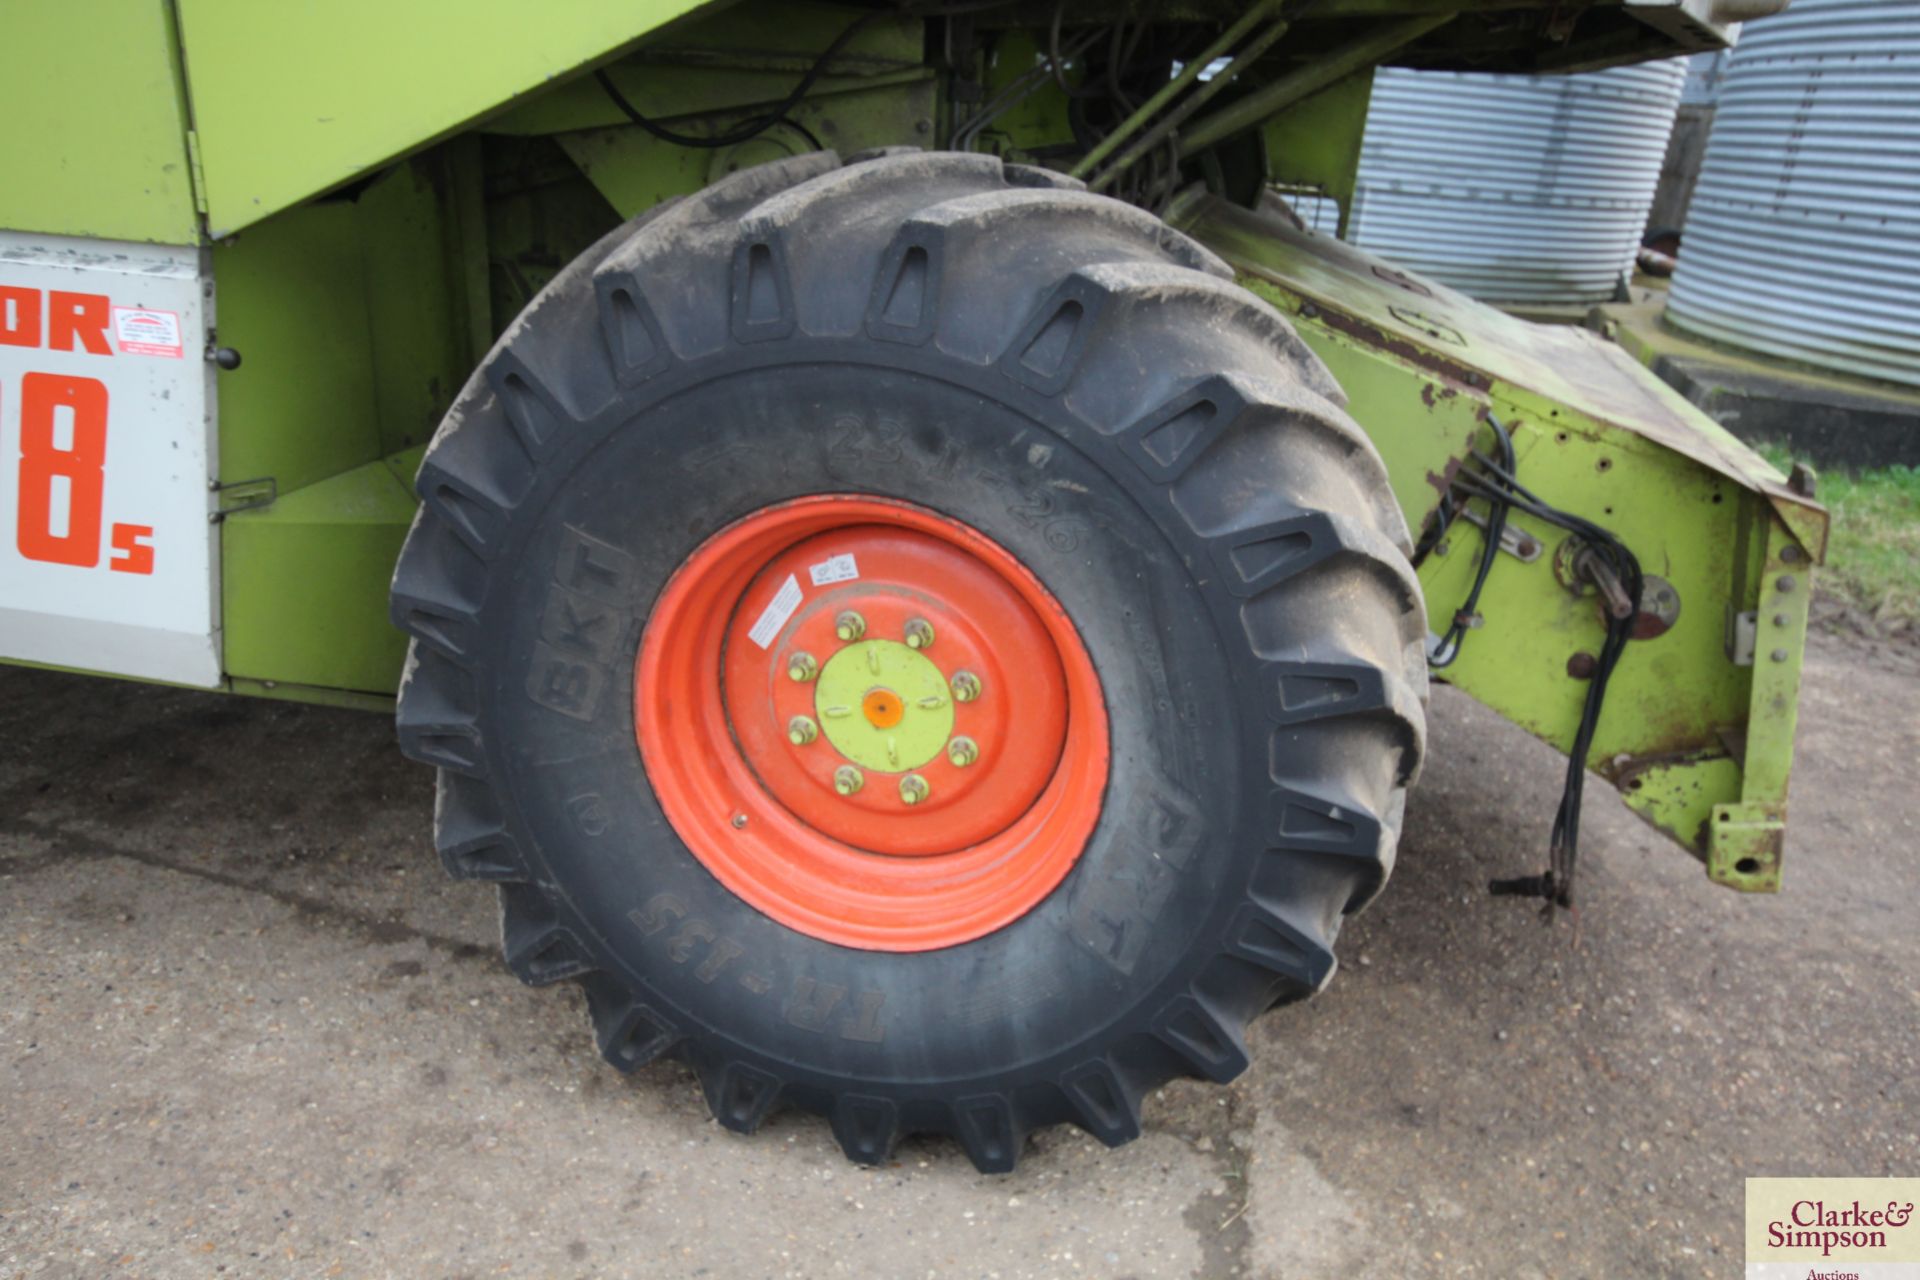 ** UPDATED HOURS ** Claas Dominator 98S combine. Registration E799 APU. Date of first registration - Image 42 of 120